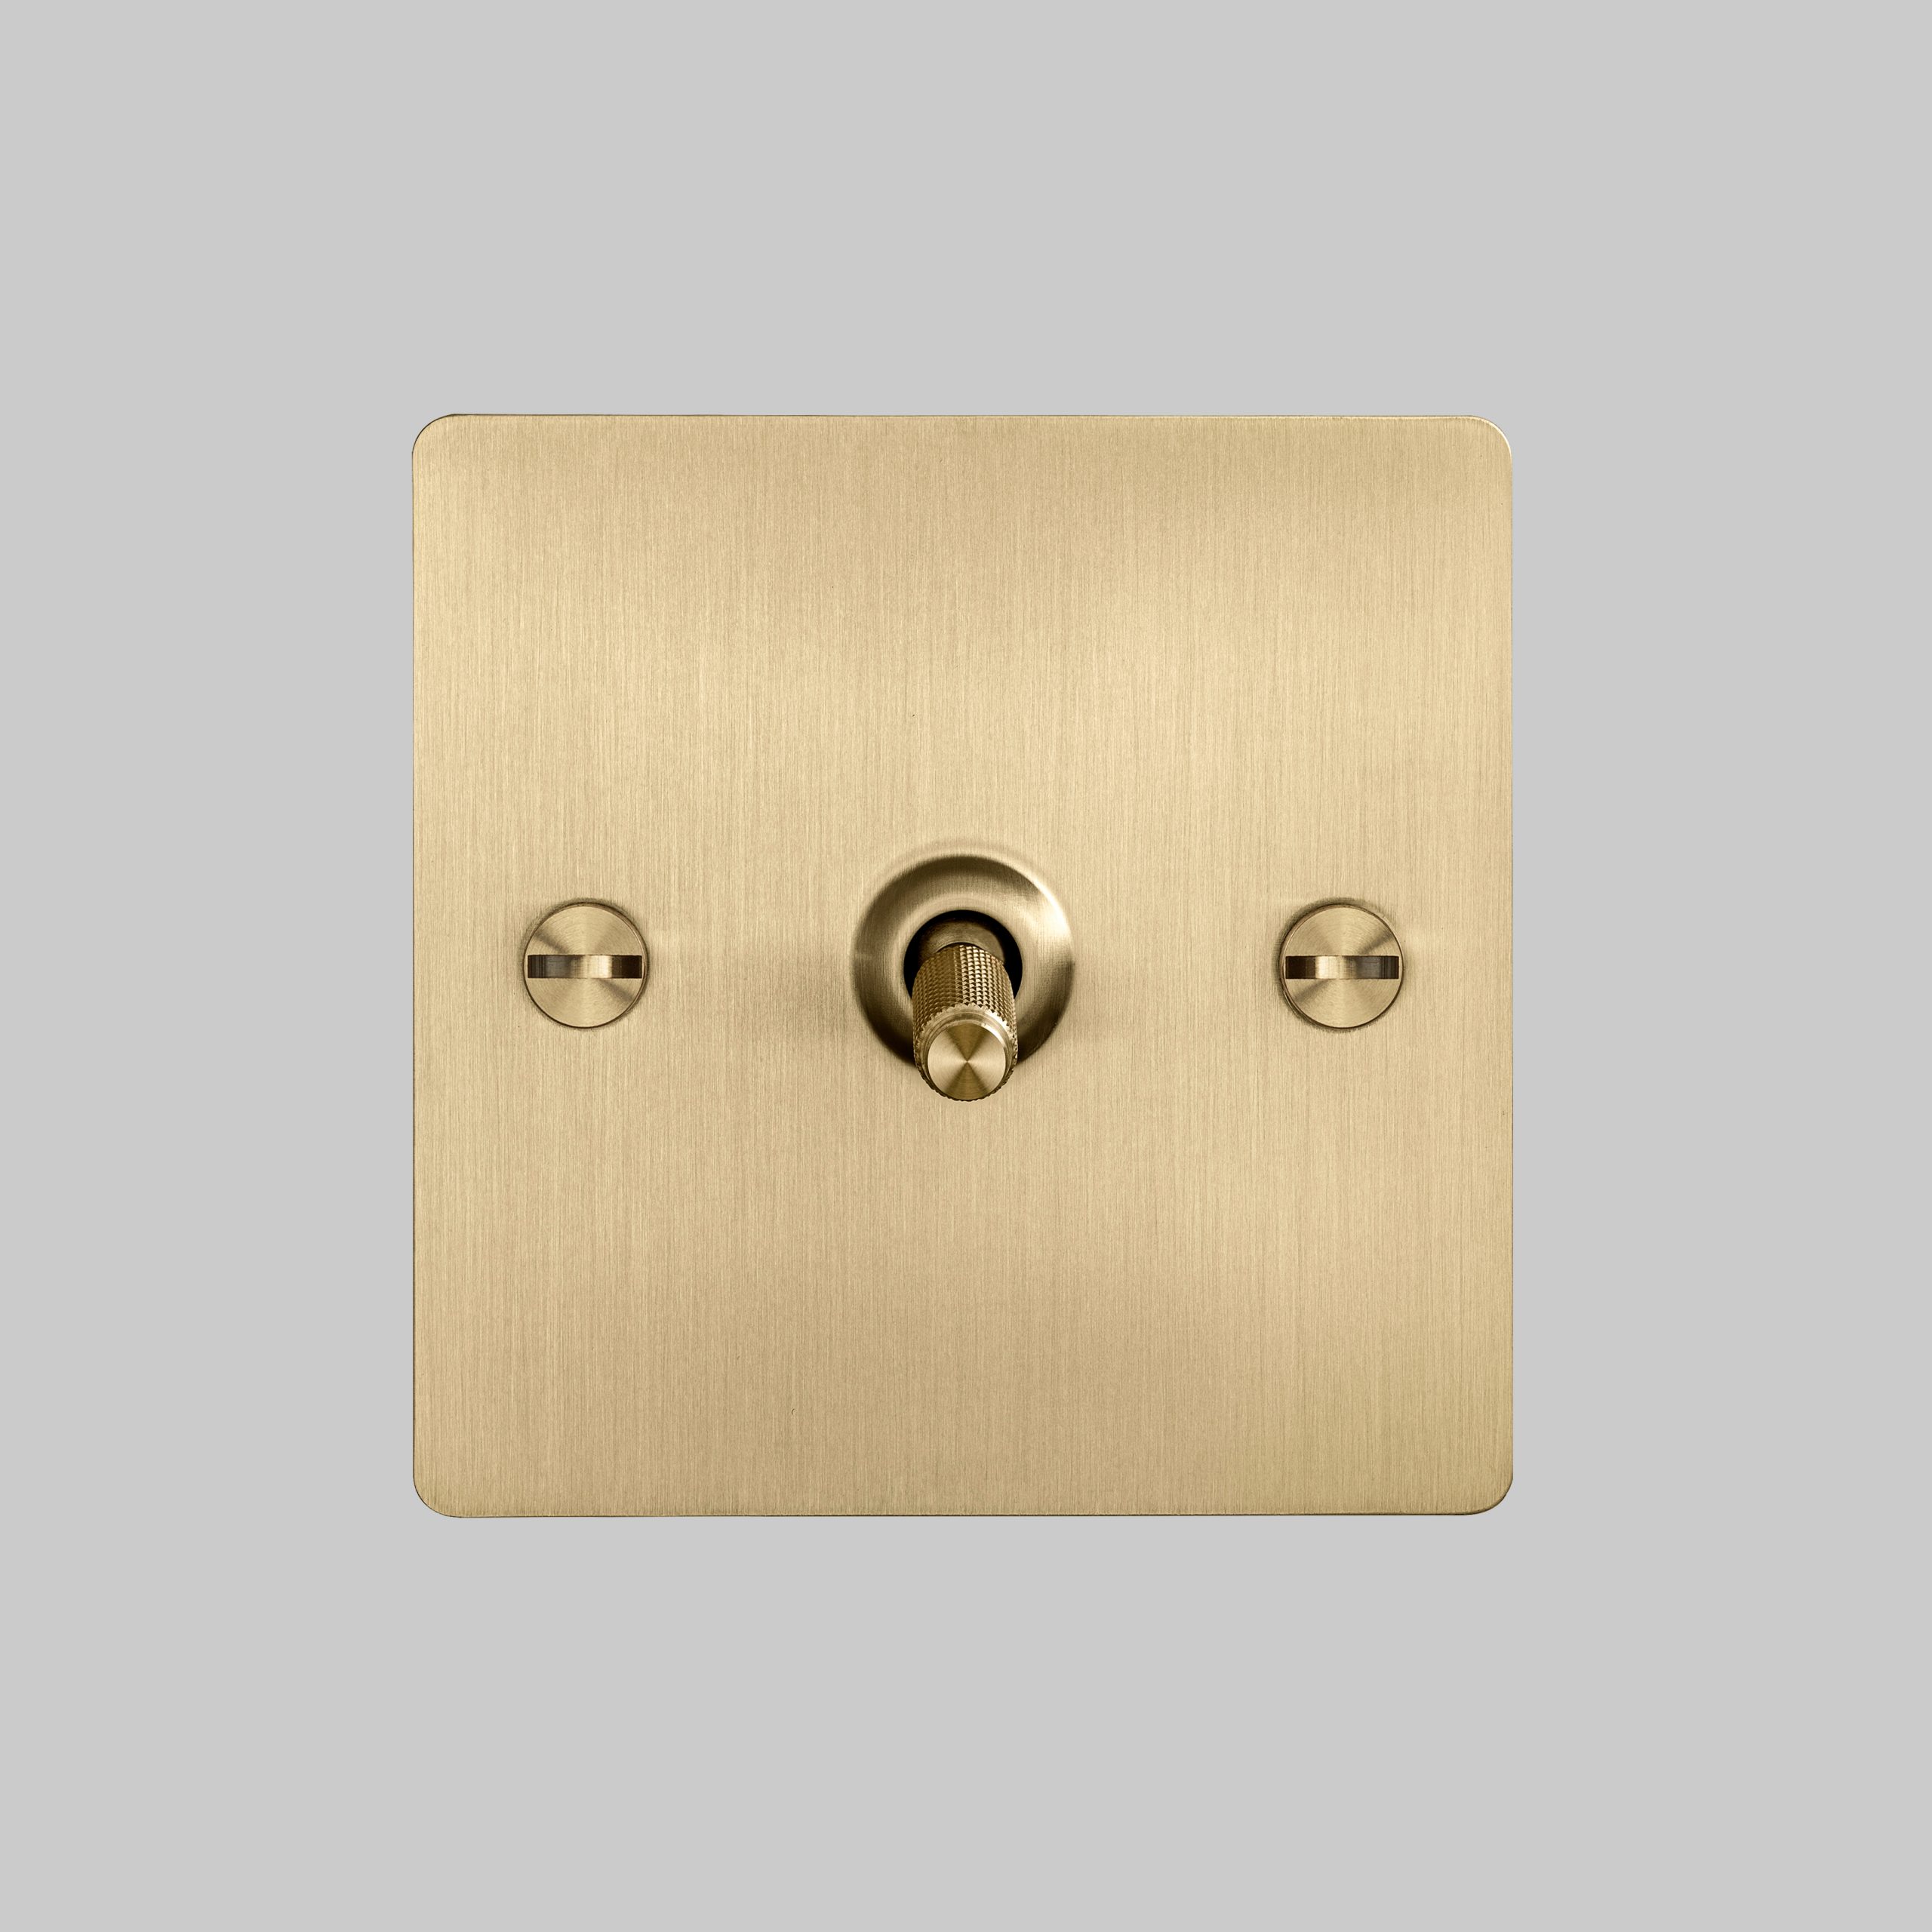 BRASS TOGGLE LIGHT SWITCH / 1G TOGGLE MADE FROM KNURLED